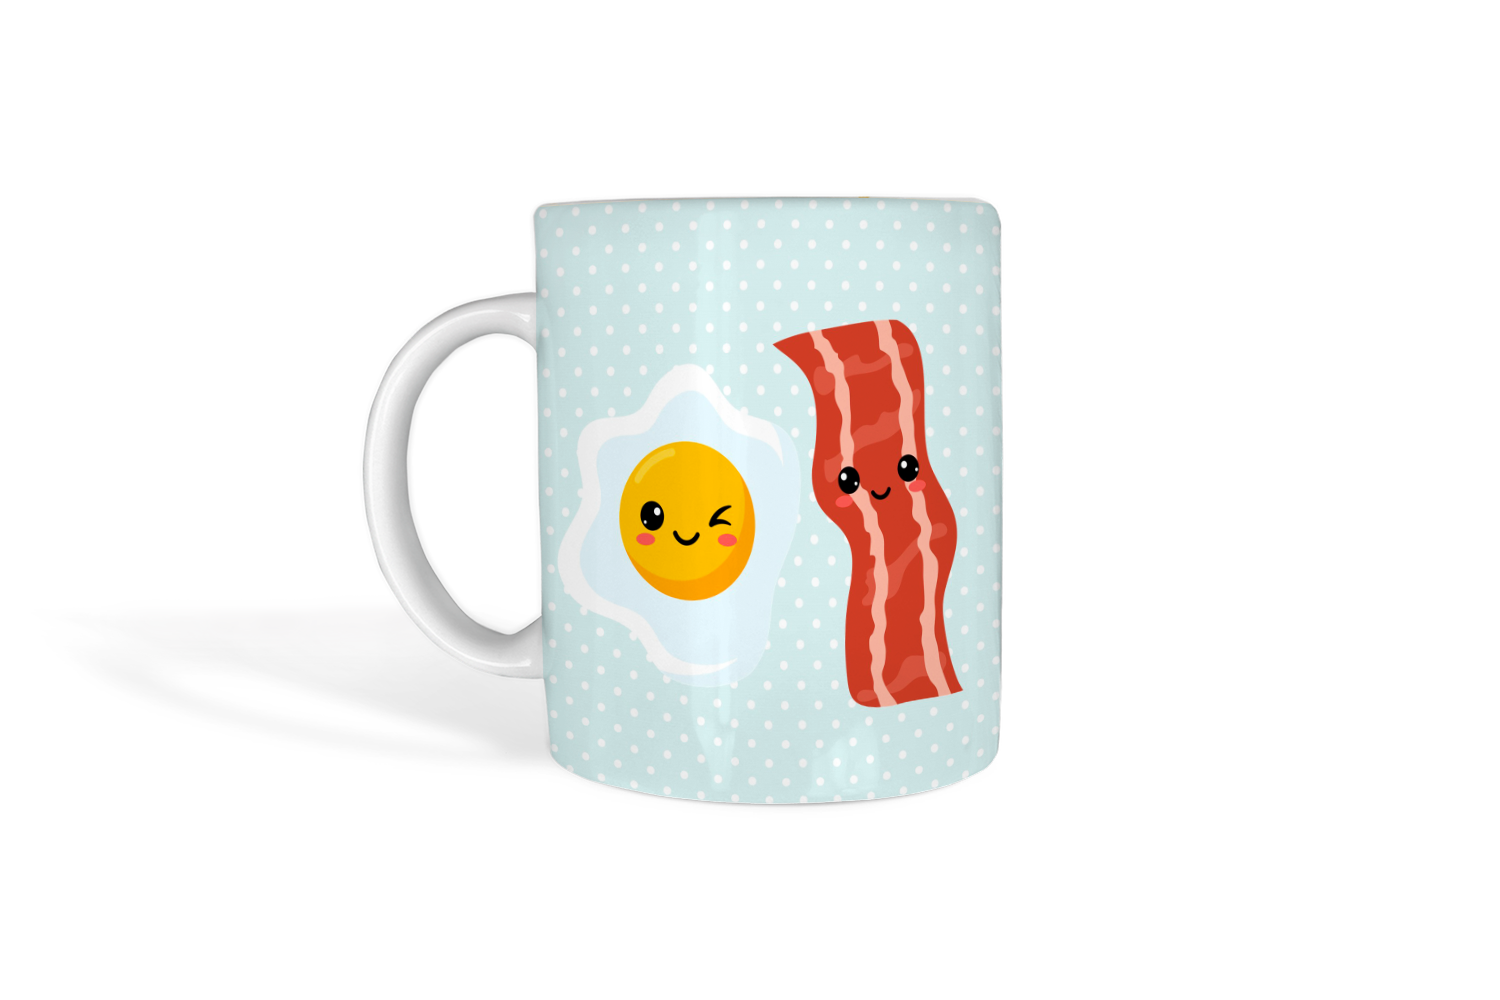 Coffee mug with bacon and eggs on it.